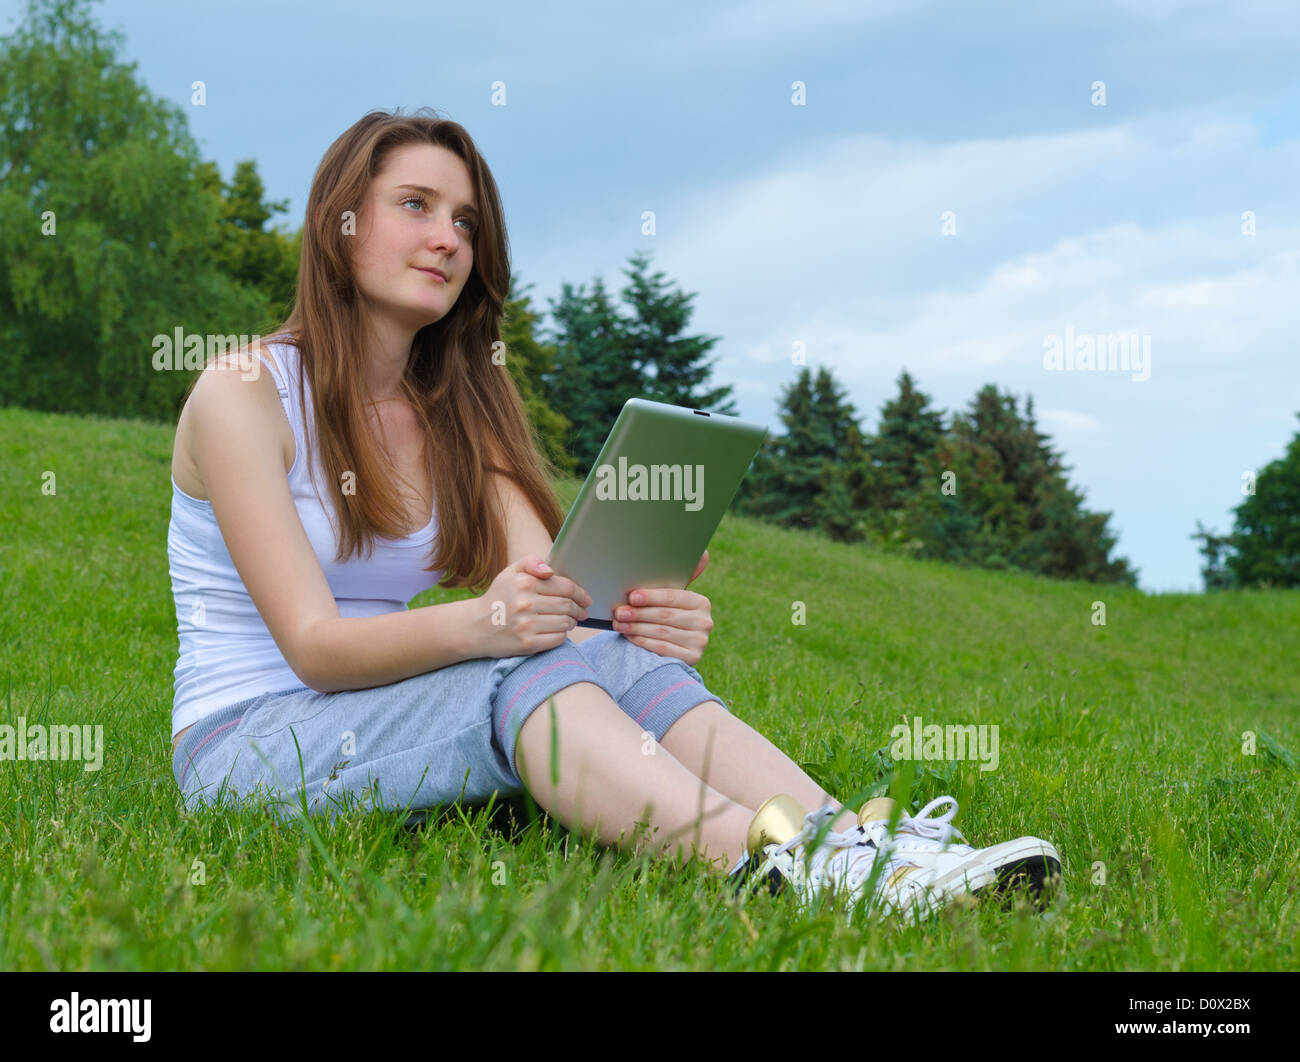 Pensive young woman sitting on green grass staring into the distance while holding a tablet on her knees Stock Photo